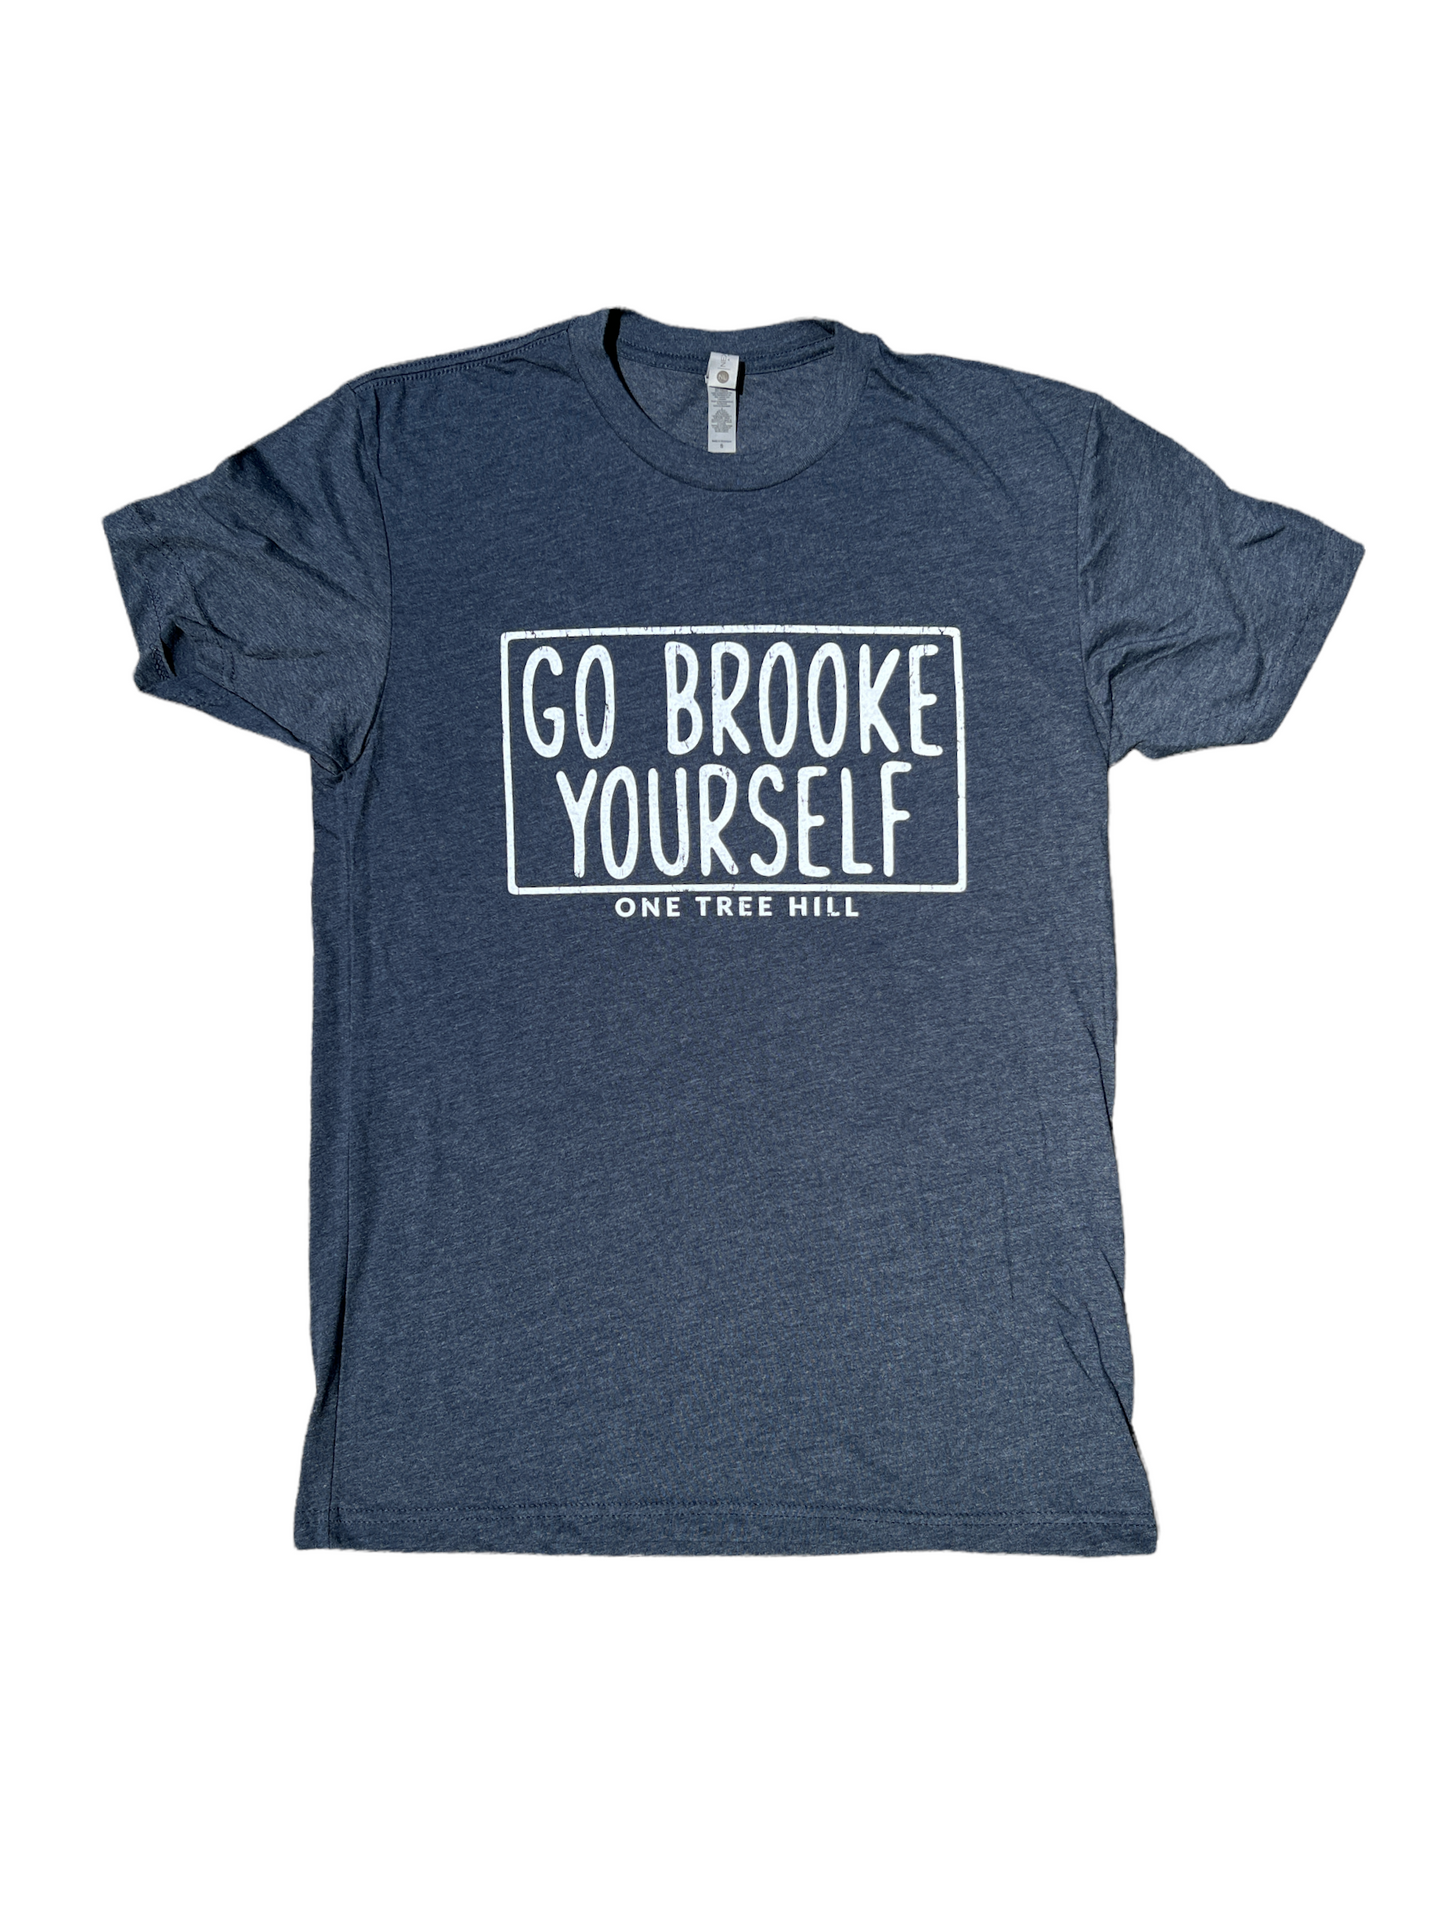 Go Brooke Yourself ( one tree hill ) – T Shirt – Midnight Navy